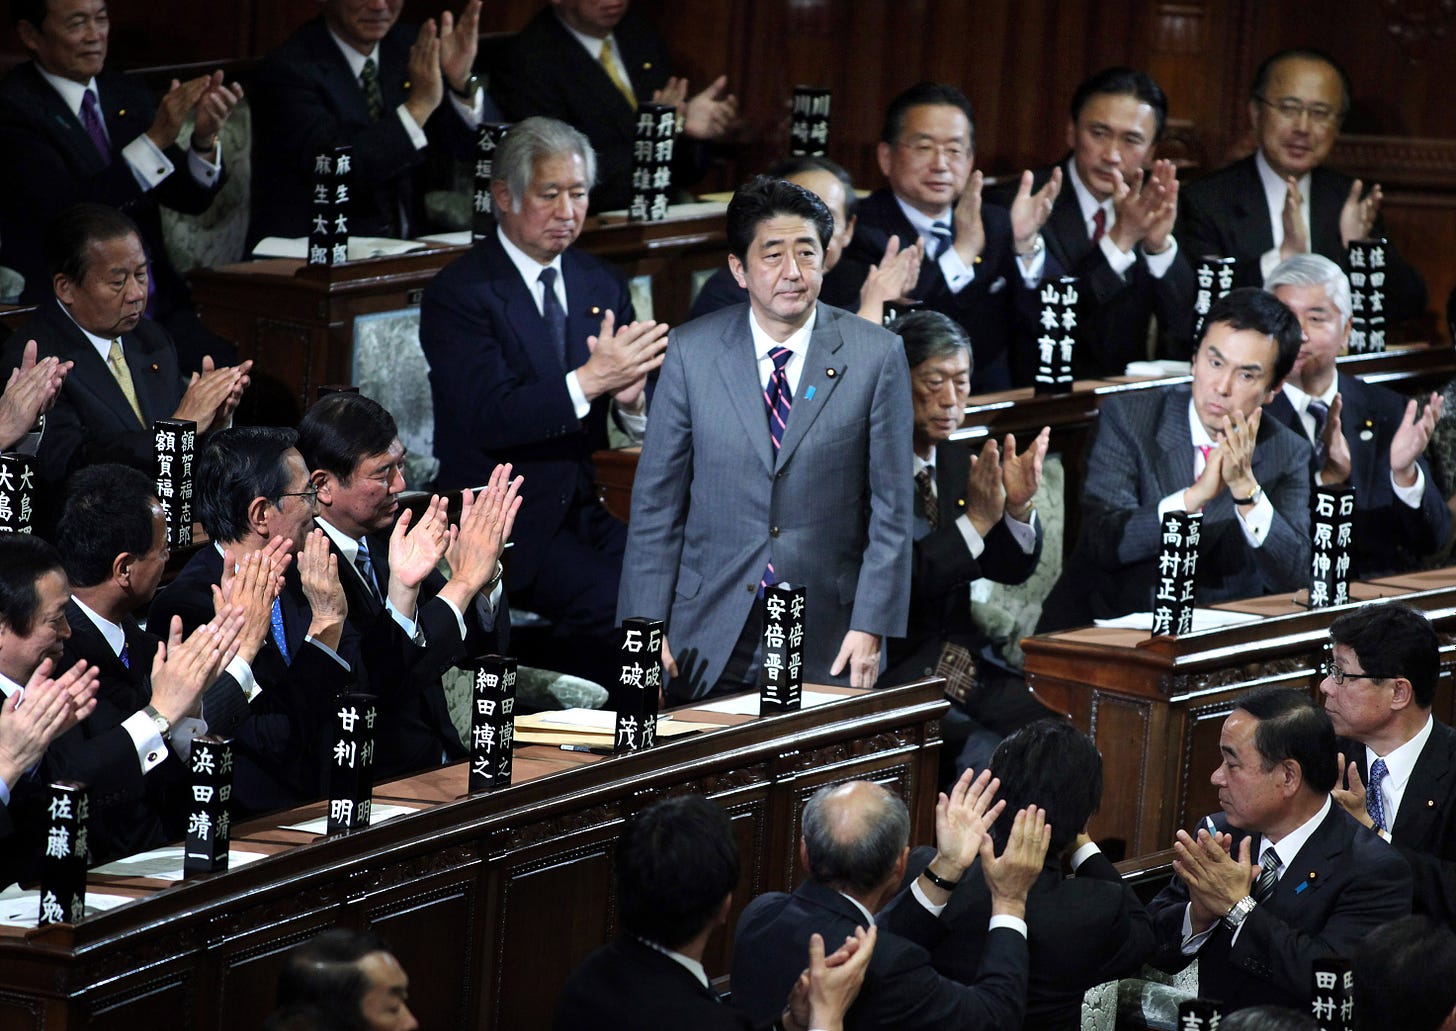 Shinzo Abe is applauded by a group of male colleagues after being elected prime minister in the Lower House in December 2012. Women are extremely underrepresented in Japan politics, where only 11.5 percent of all Diet members are female.  | BLOOMBERG